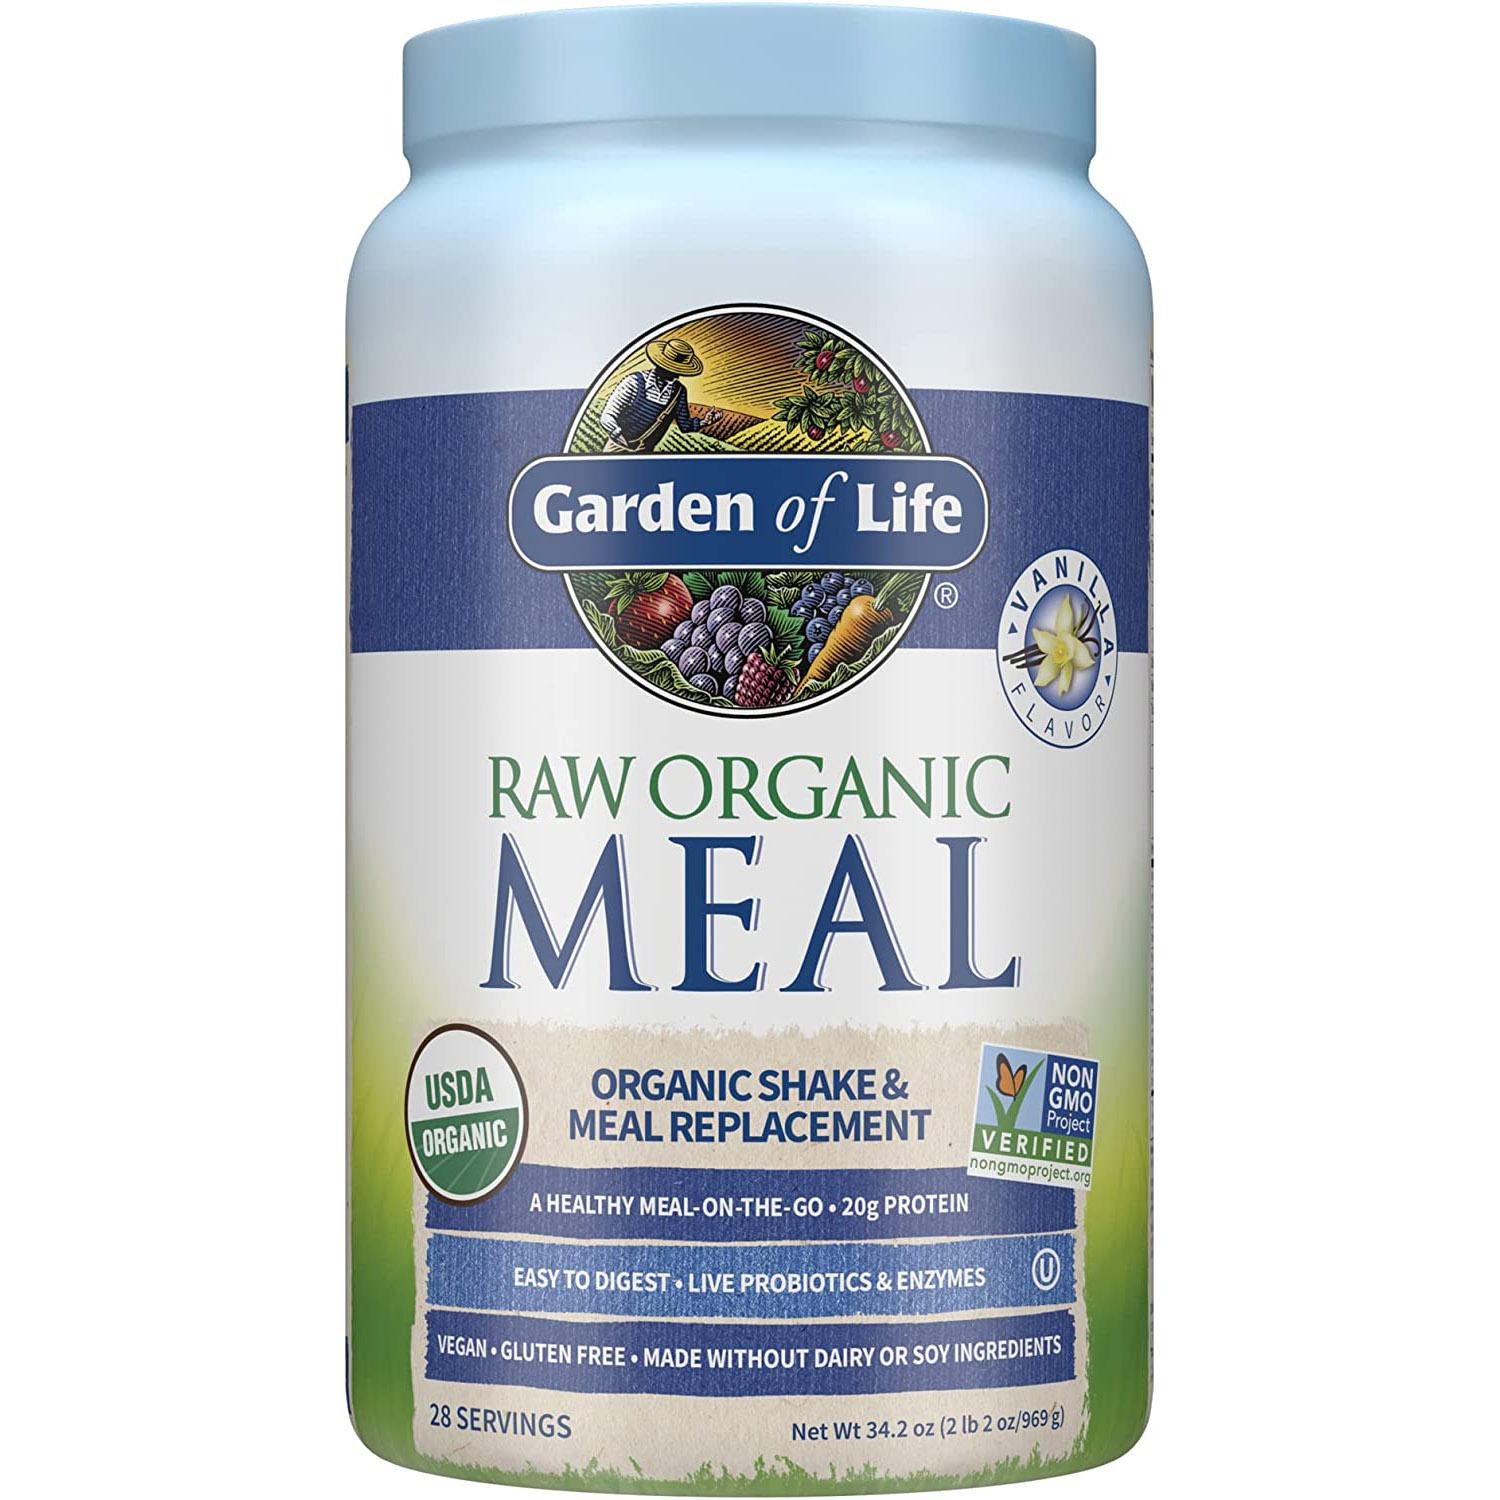 Garden of Life Raw Organic Meal Replacement Powder for $22.14 Shipped